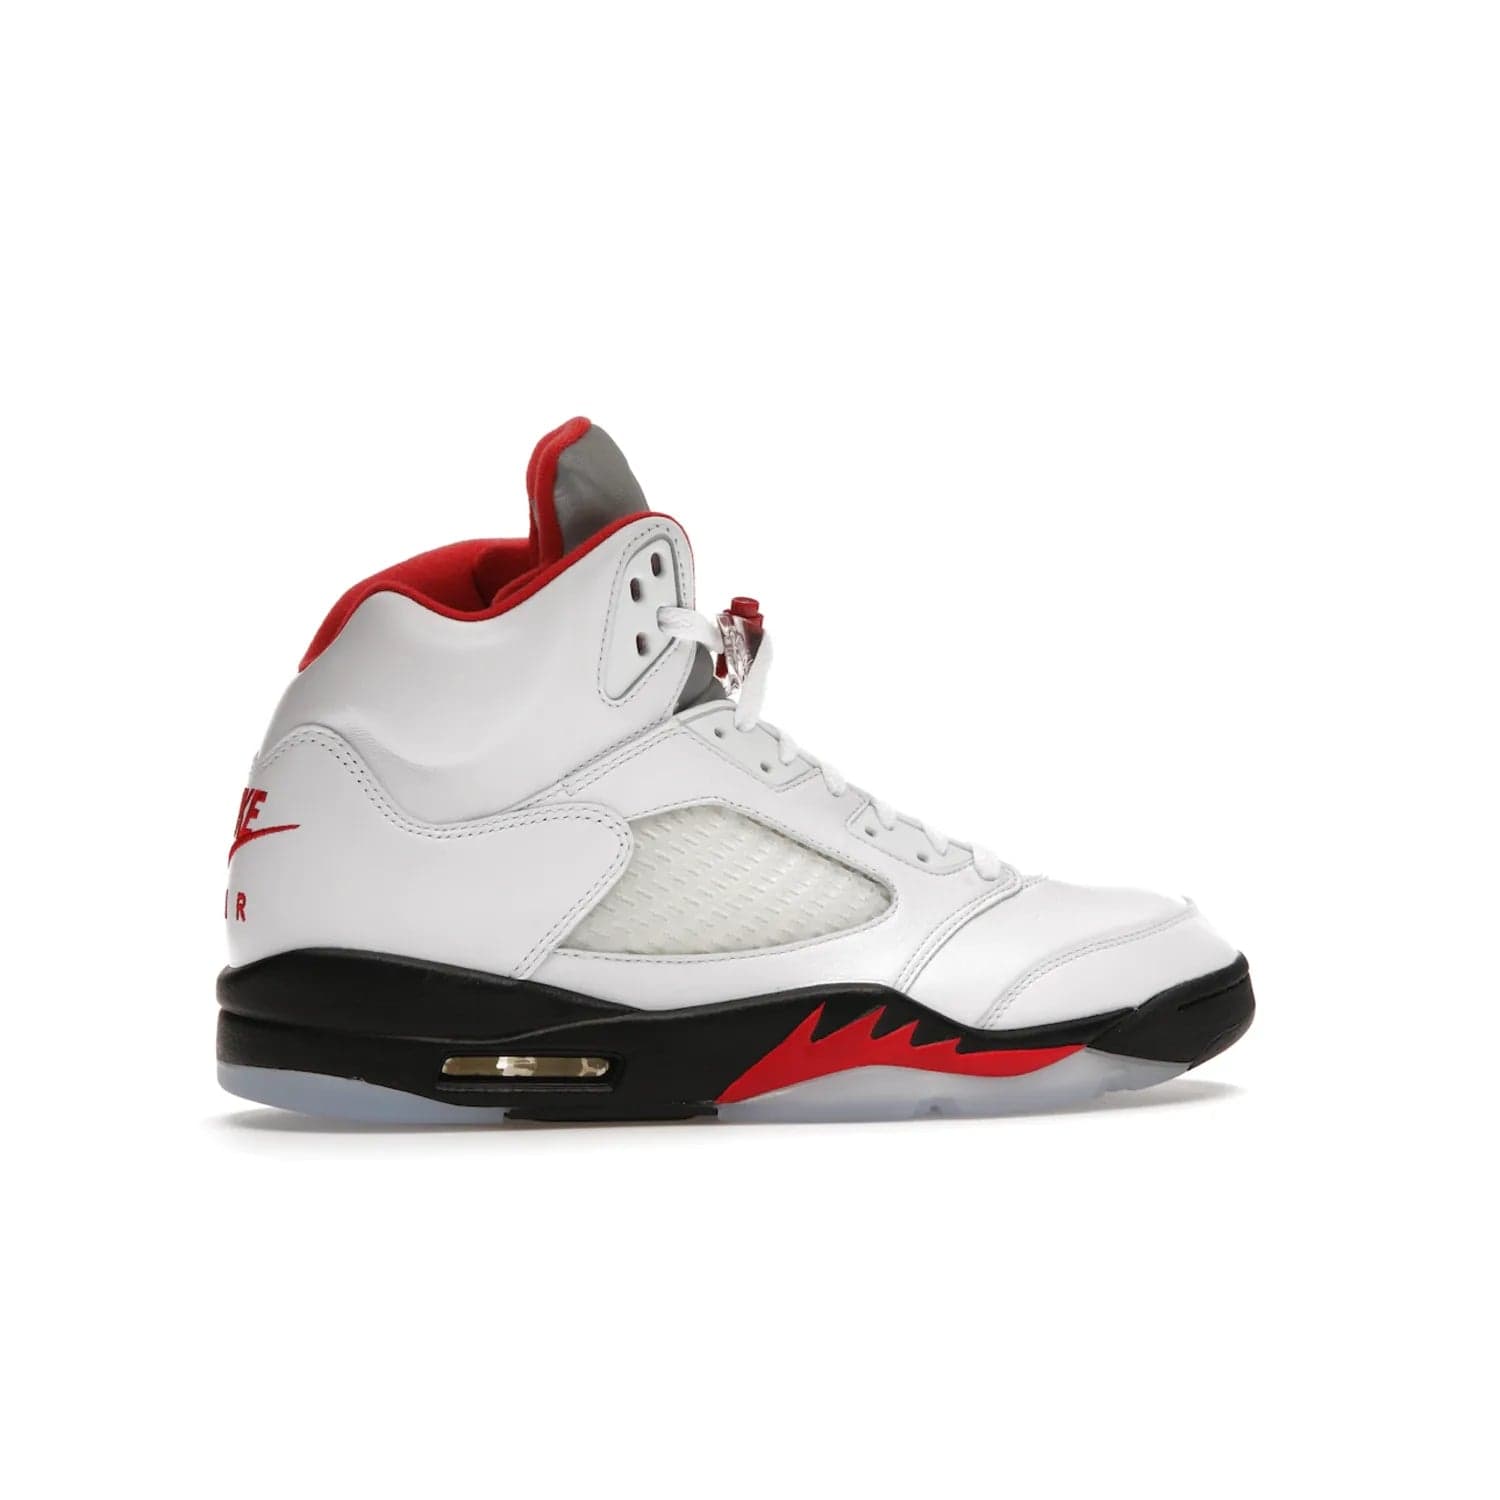 Jordan 5 Retro Fire Red Silver Tongue (2020) - Image 35 - Only at www.BallersClubKickz.com - Experience classic styling with the Jordan 5 Retro Fire Red Silver Tongue (2020). Features a white leather upper, 3M reflective tongue, midsole colorblocking, and an icy translucent outsole. Now available, upgrade your shoe collection today.